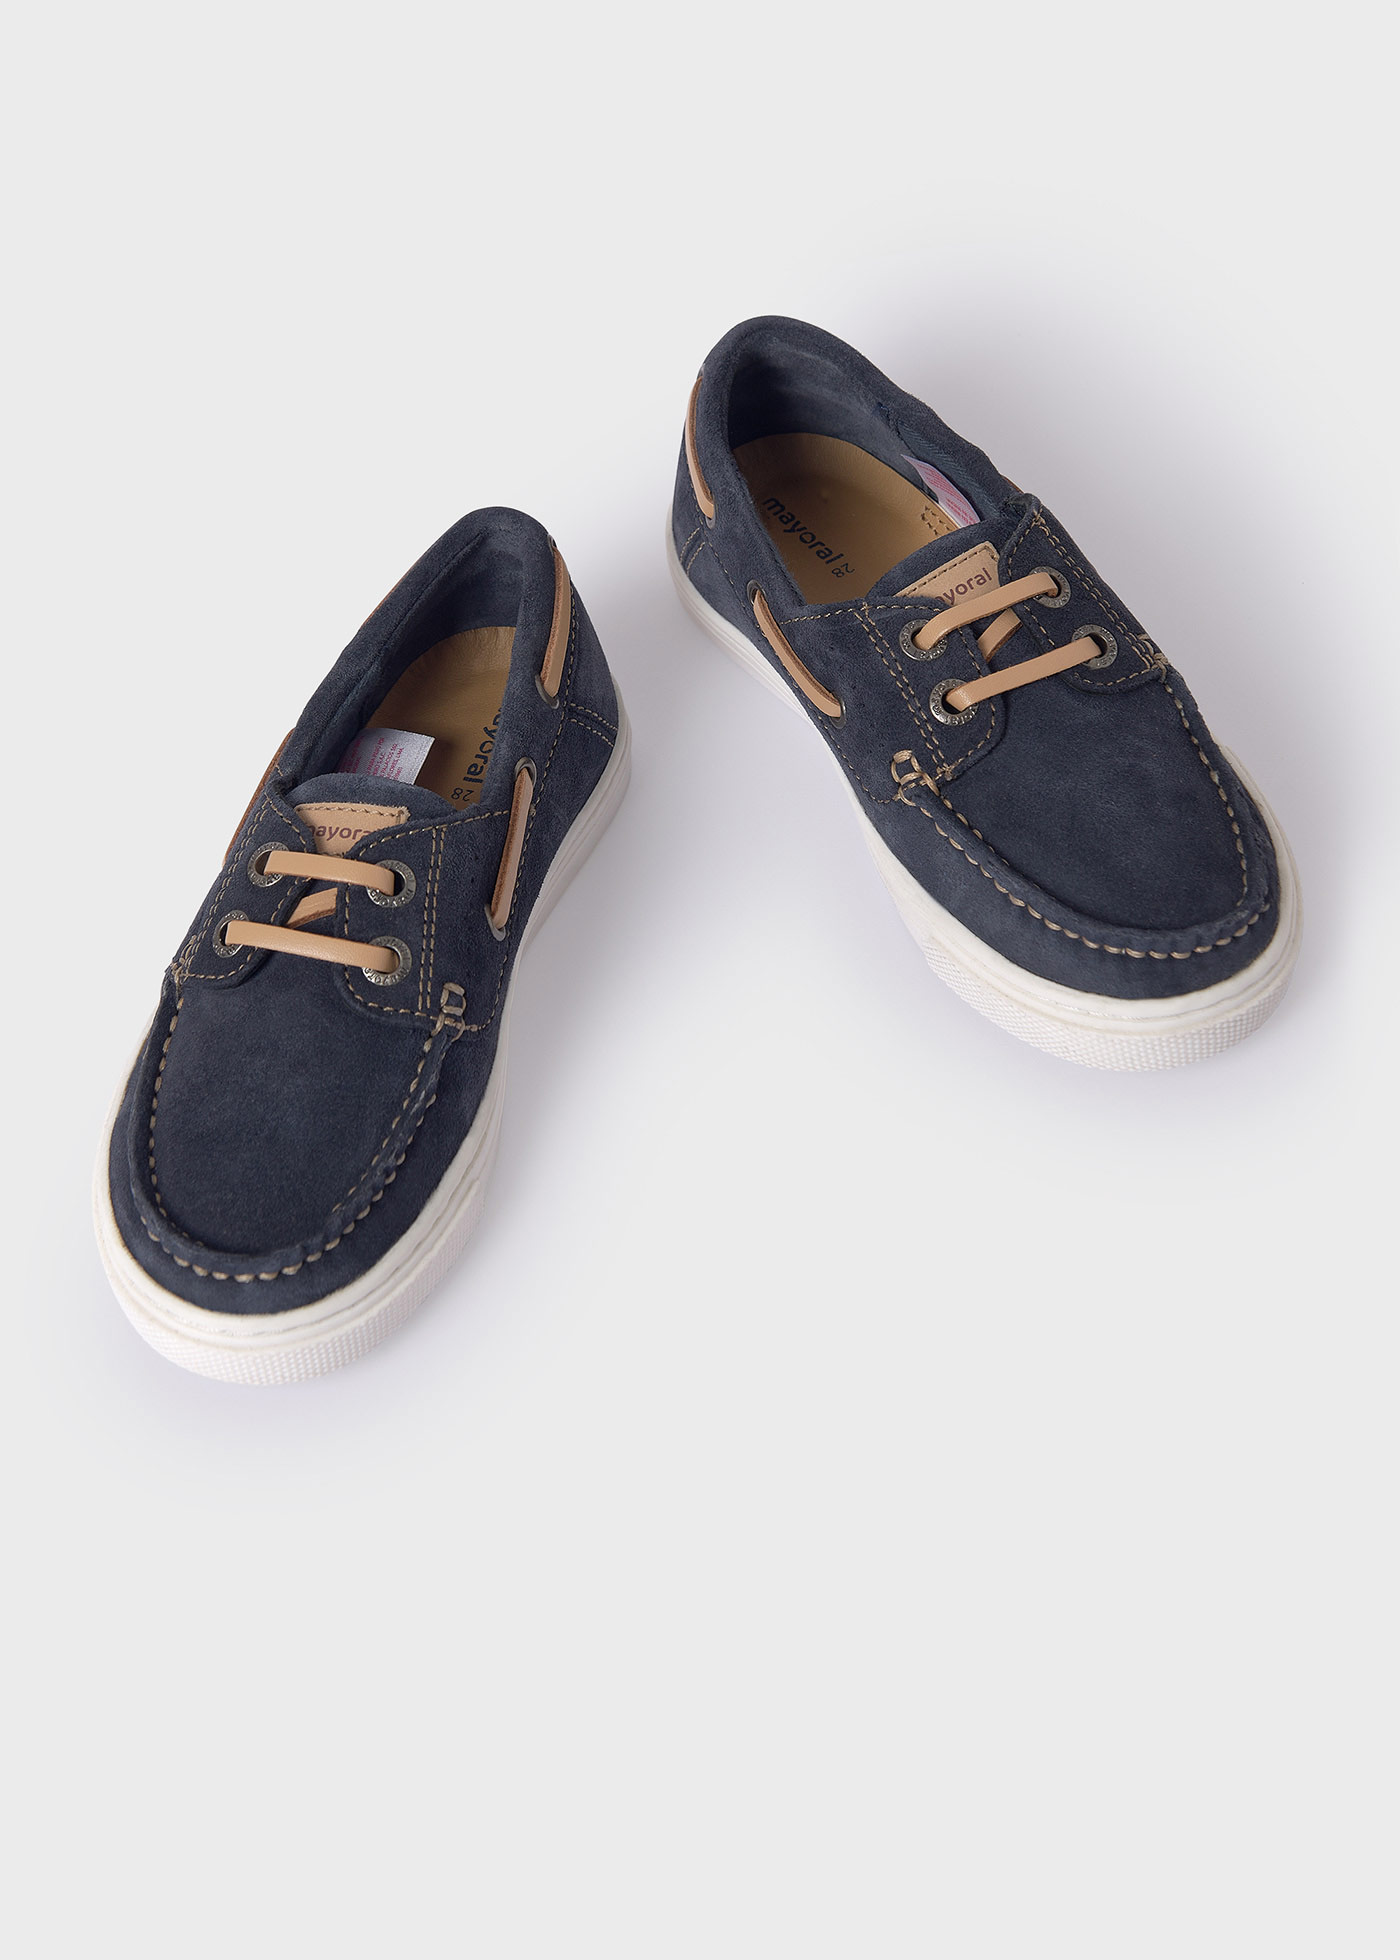 Boys leather boat shoes sustainable leather